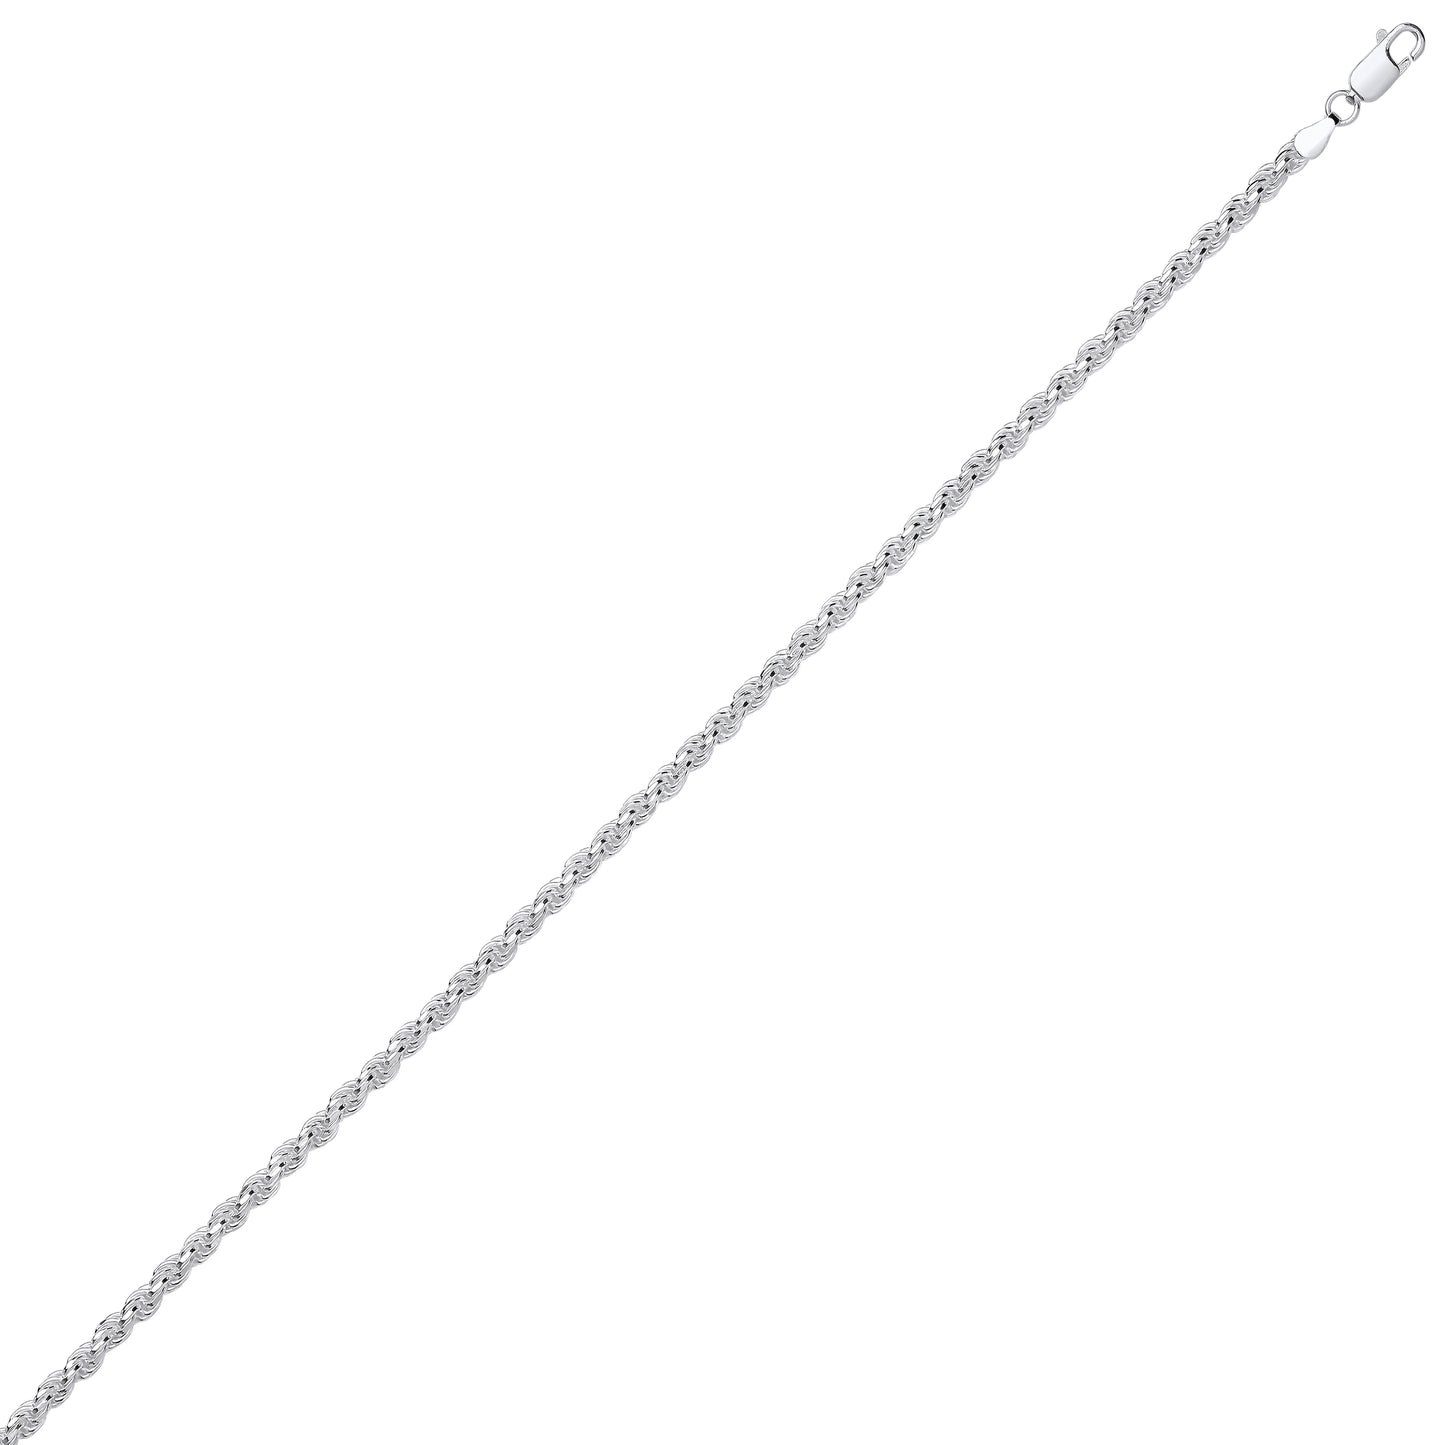 Unisex Silver  Diamond-cut Solid Rope Chain Necklace - GVCH42